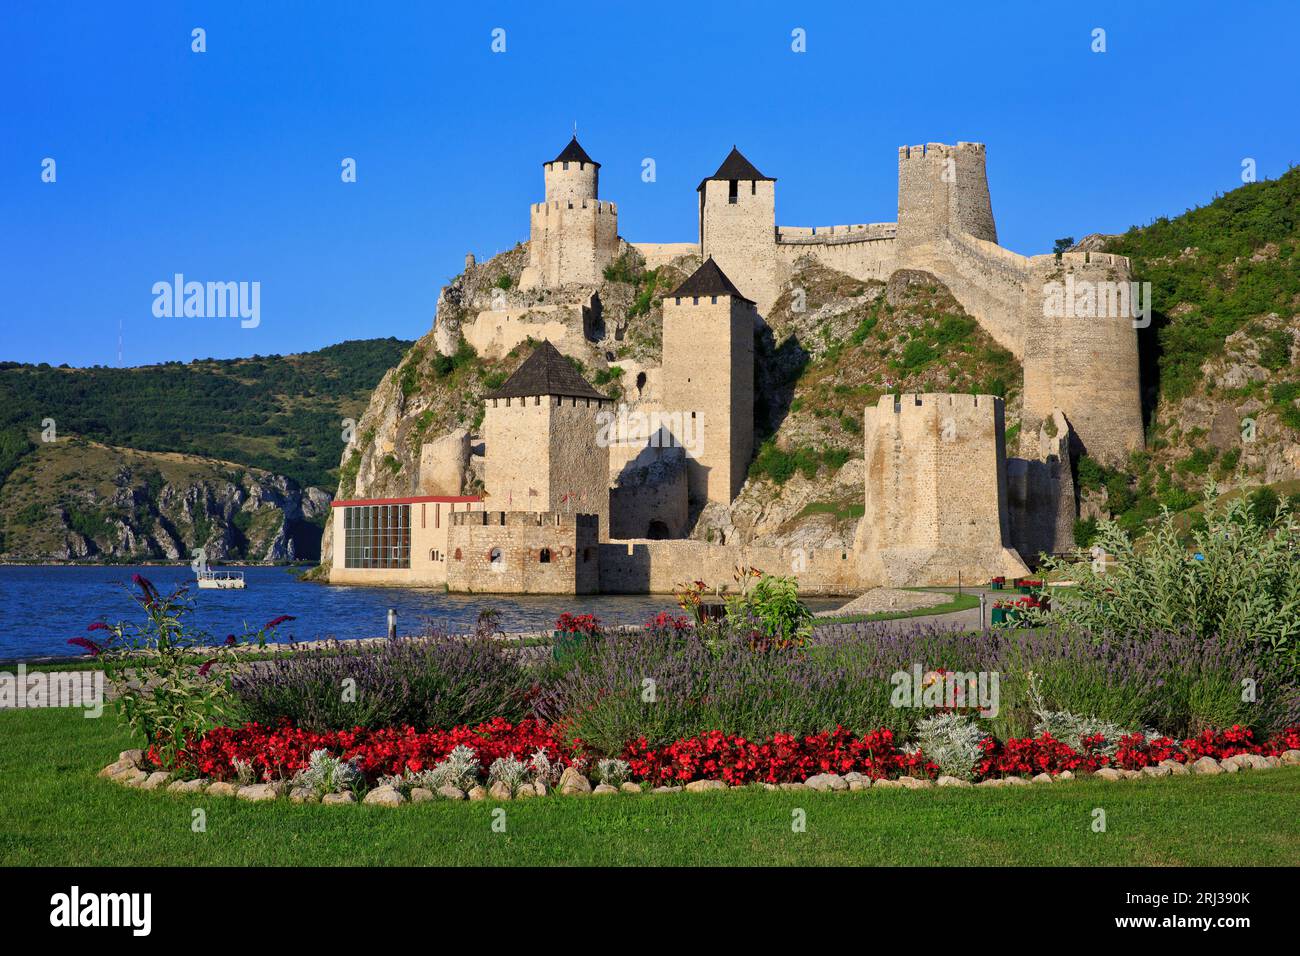 The medieval Golubac Fortress (14th century) in Golubac, Serbia on a beautiful summer evening Stock Photo